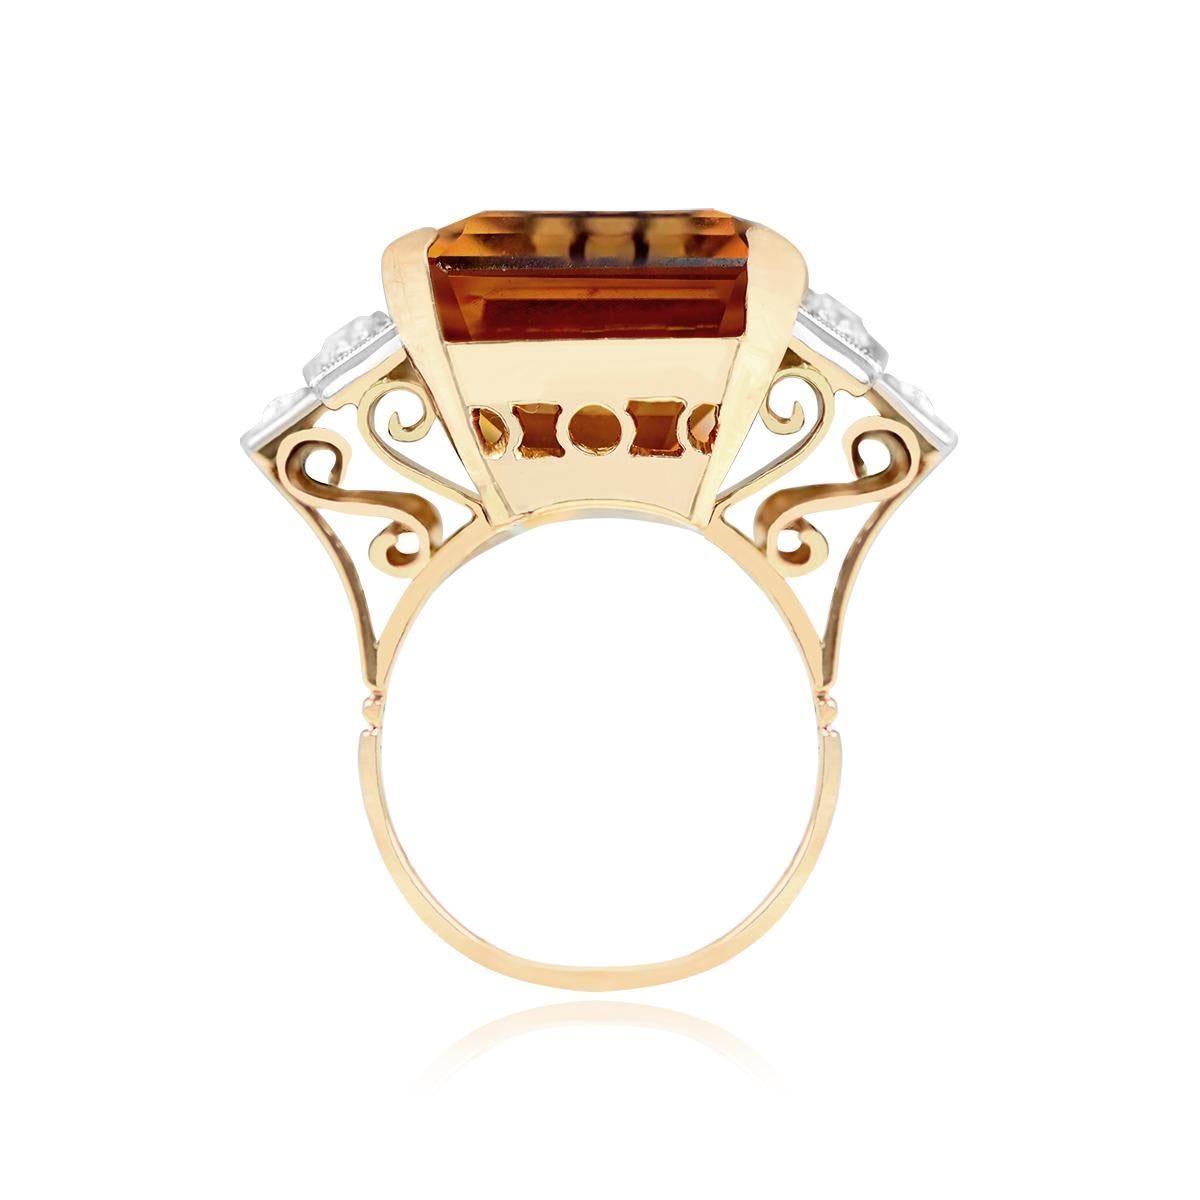 Vintage 12.40ct Emerald Cut Natural Citrine Cocktail Ring, 18k Yellow Gold In Excellent Condition For Sale In New York, NY